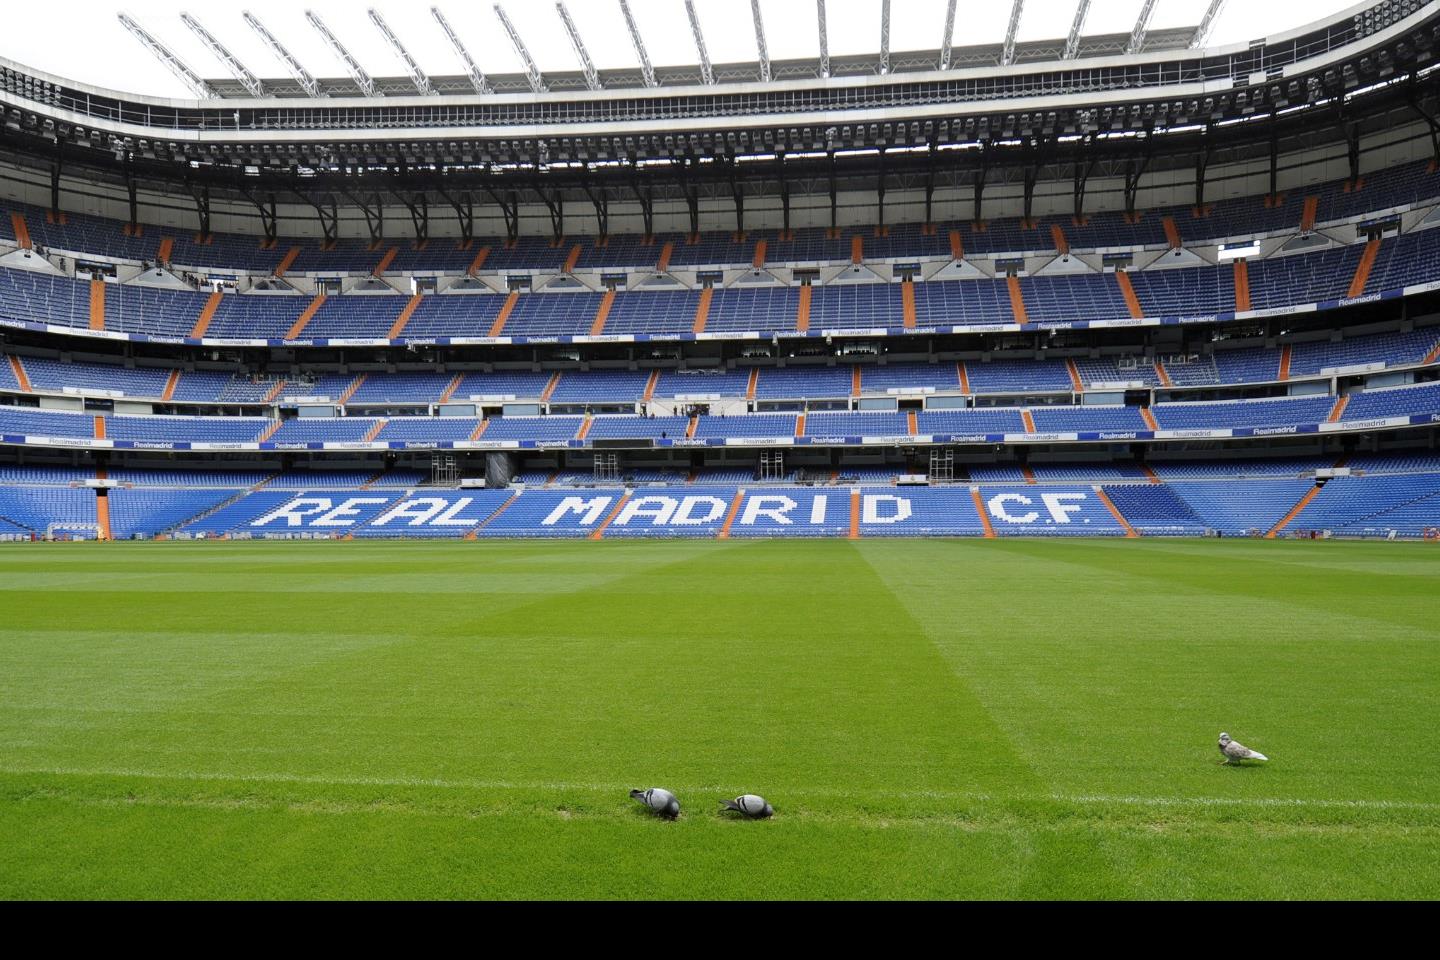 Real Madrid FC Tickets Buy or Sell Tickets for Real Madrid FC's 2022